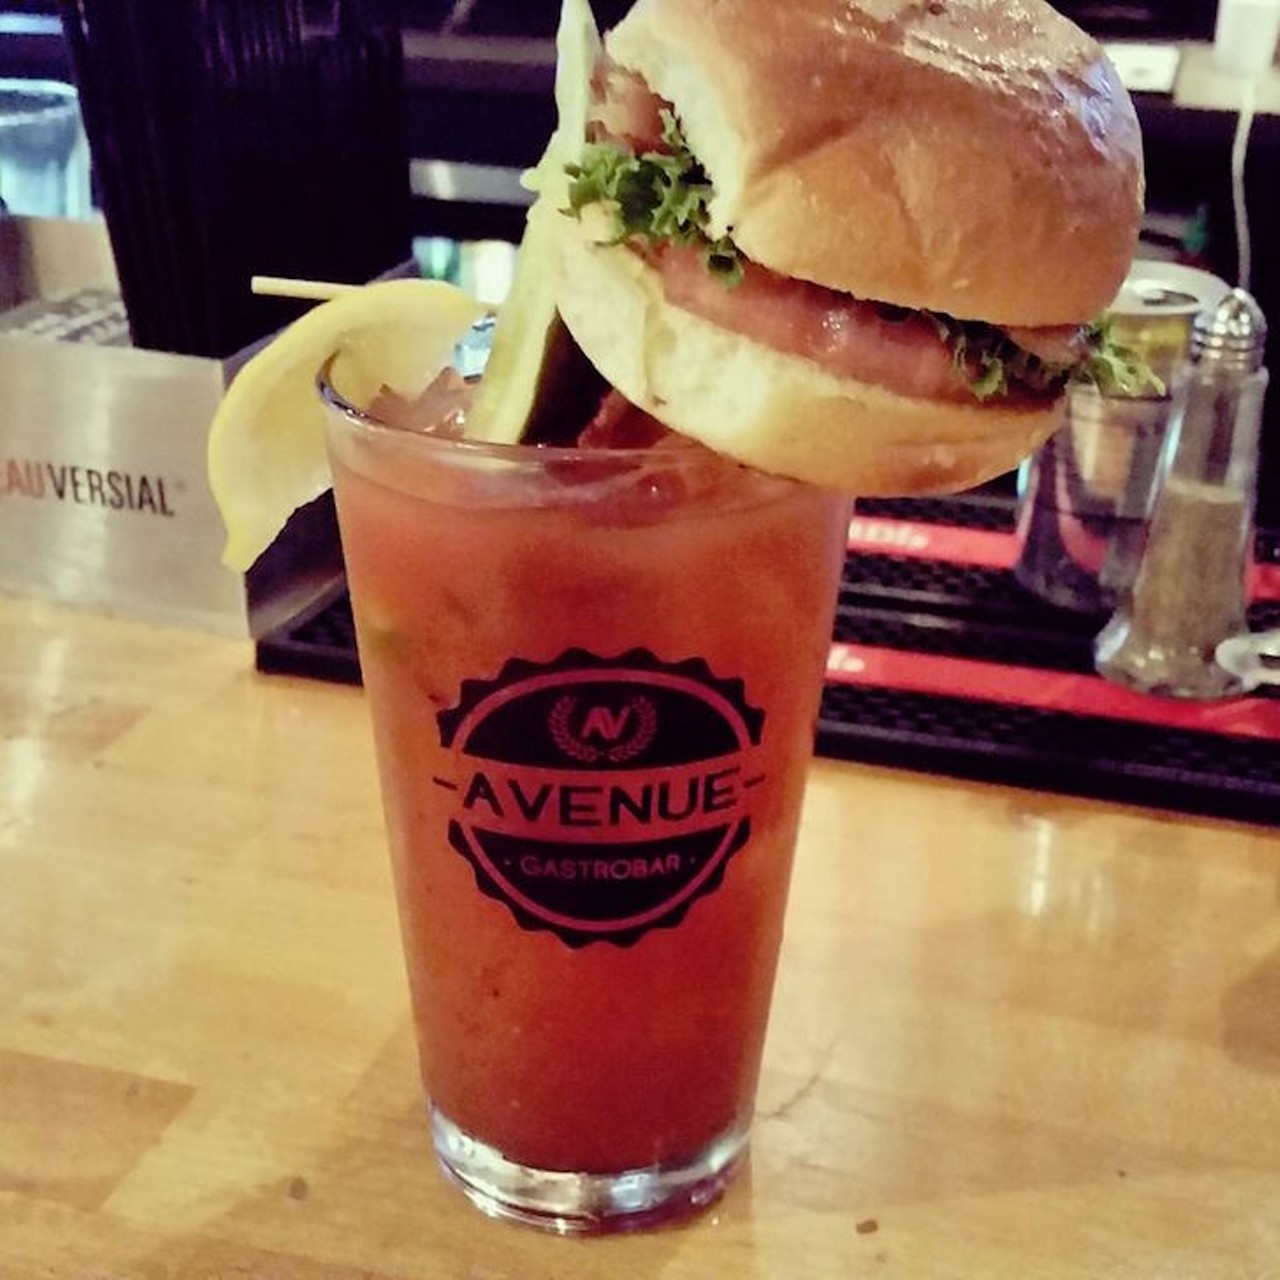 Avenue Gastrobar
13 S. Orange Ave. | 407-839-5039
We all knew it was only a matter of time until a slider appeared on an Orlando Bloody Mary. Thank you, Avenue Gastrobar.
Photo via Avenue Gastrobar/Facebook